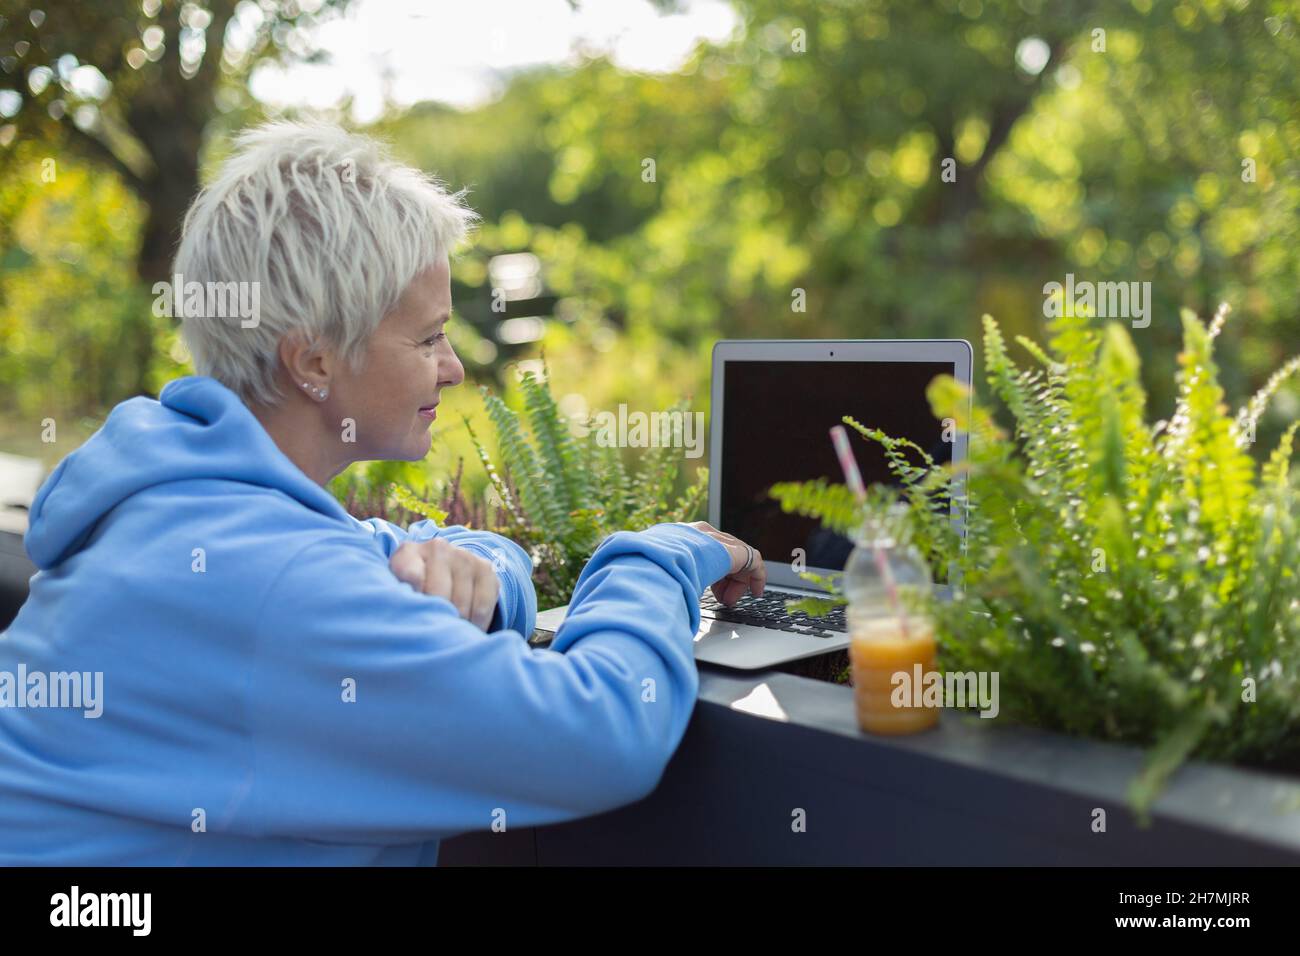 Woman with juice working at laptop on patio Stock Photo